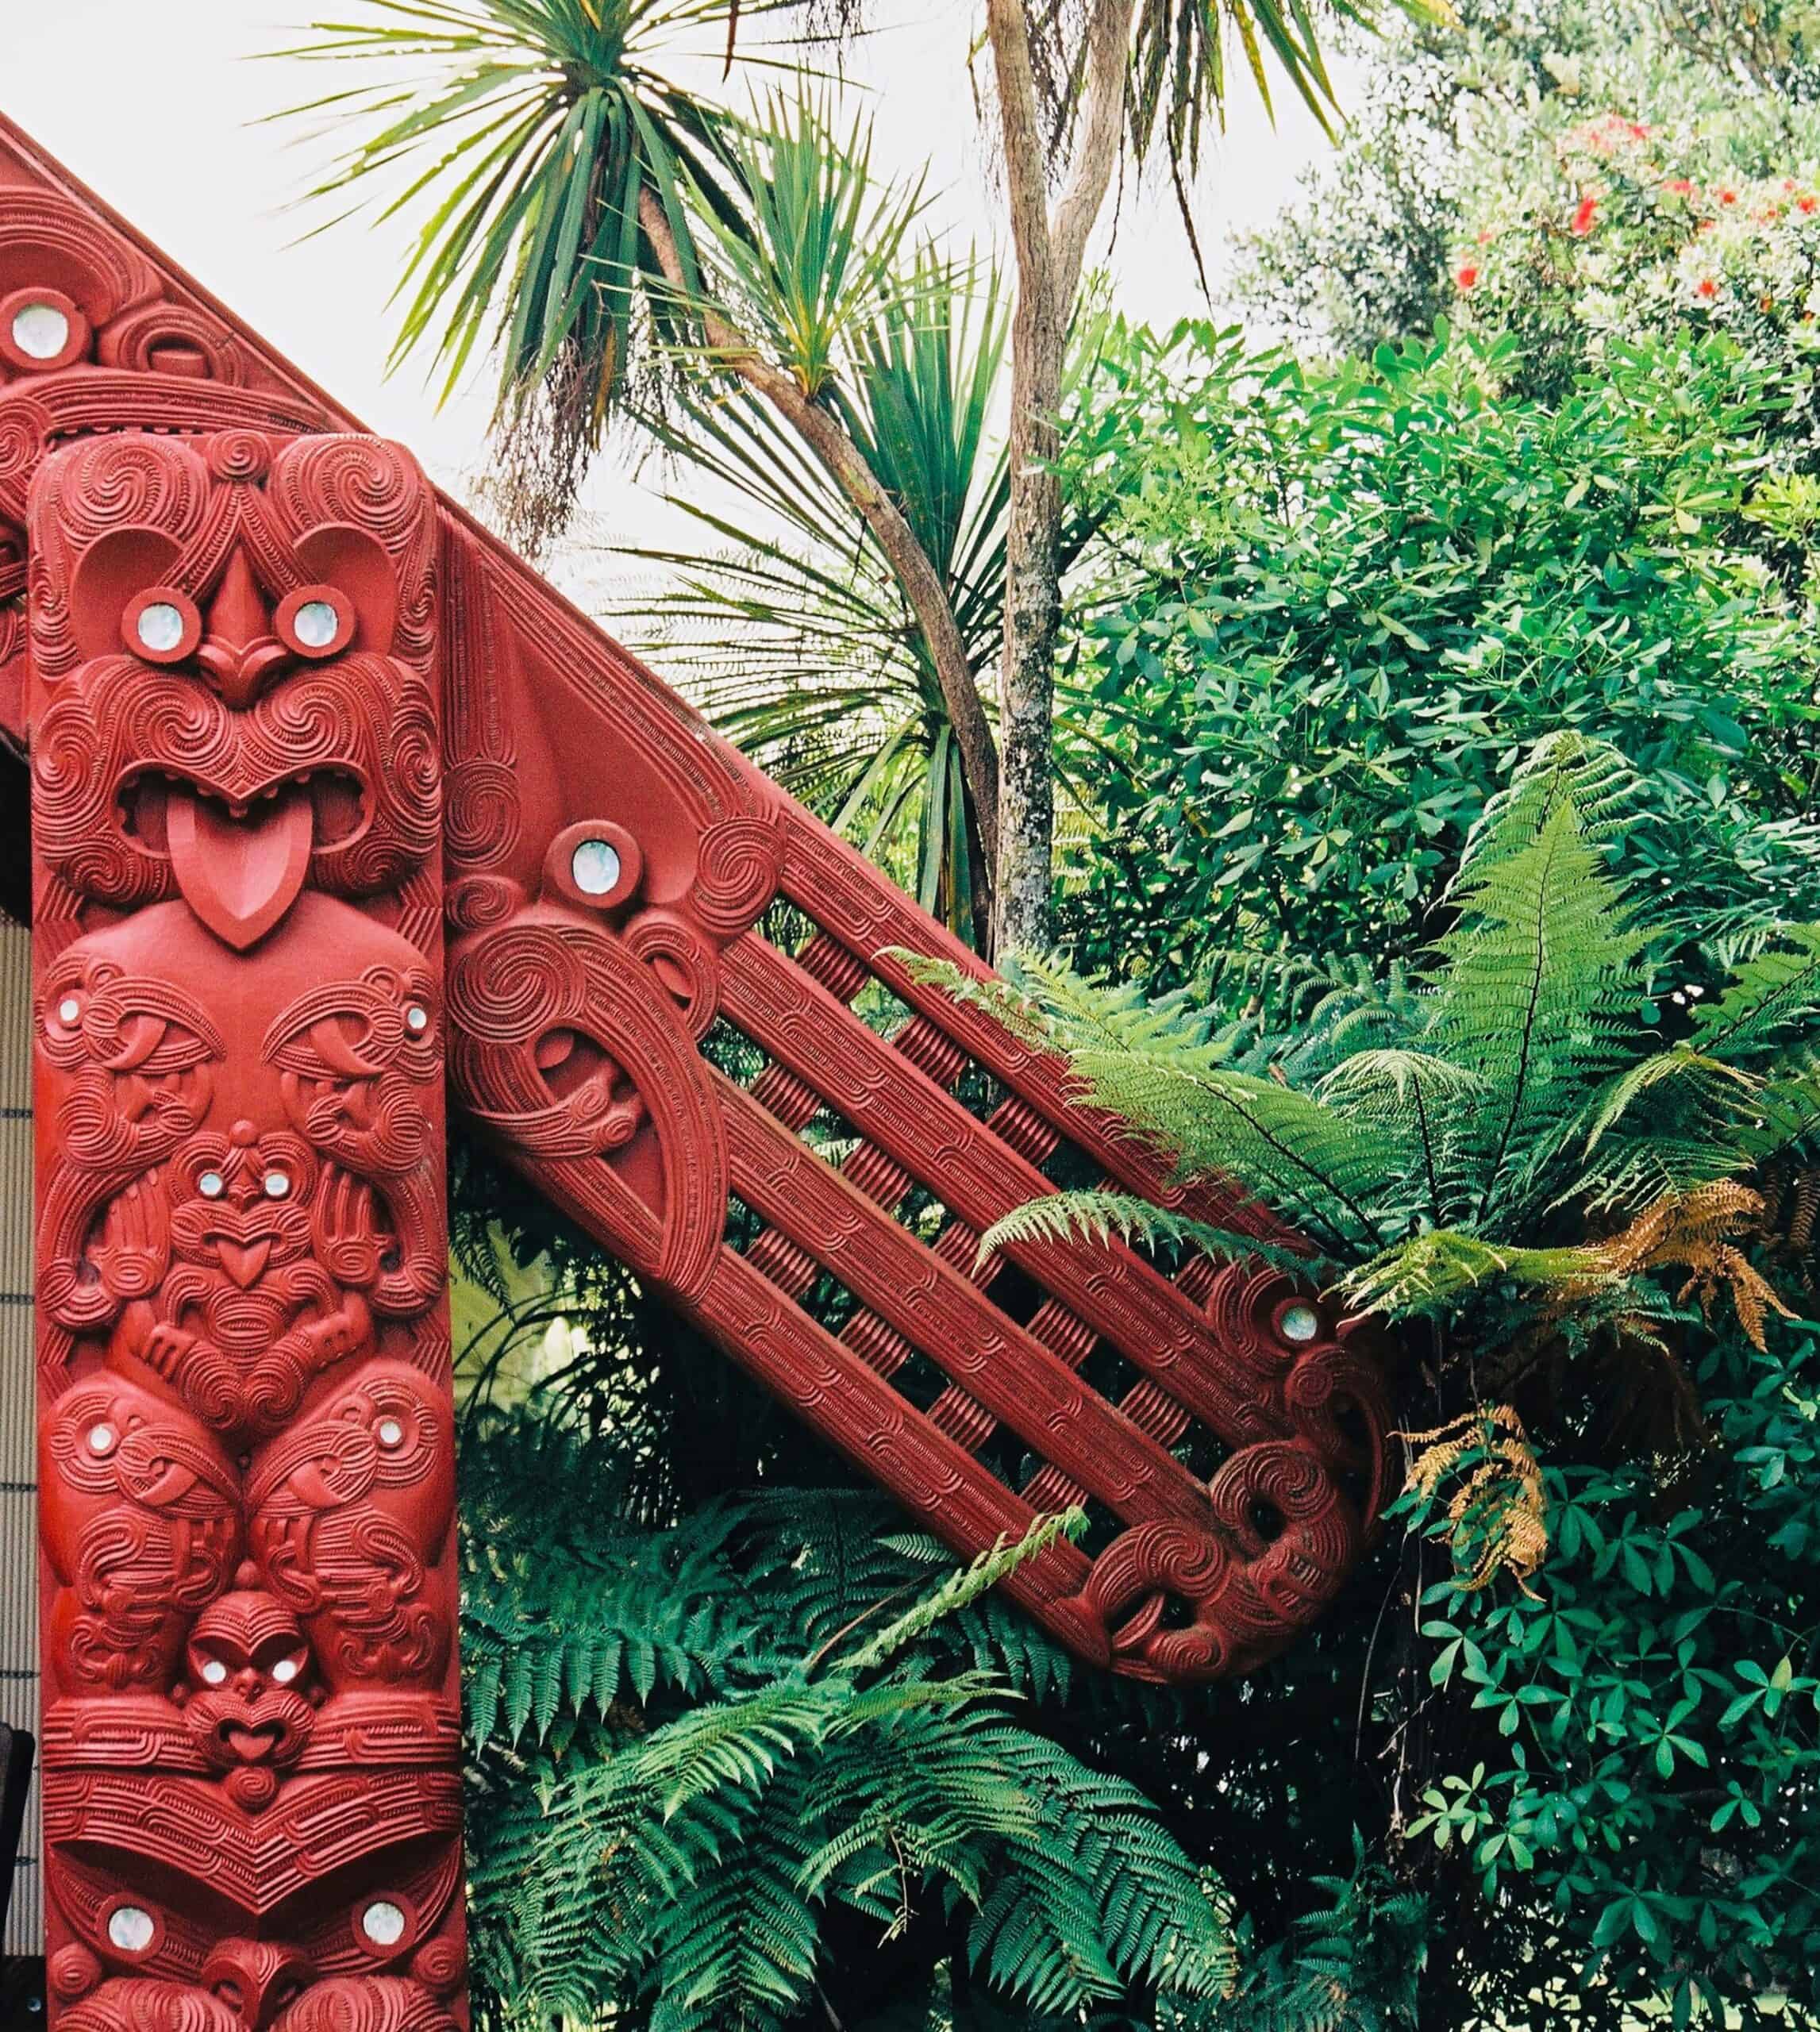 red Kiwi Chronicles: Navigating New Zealand's cultural landscape